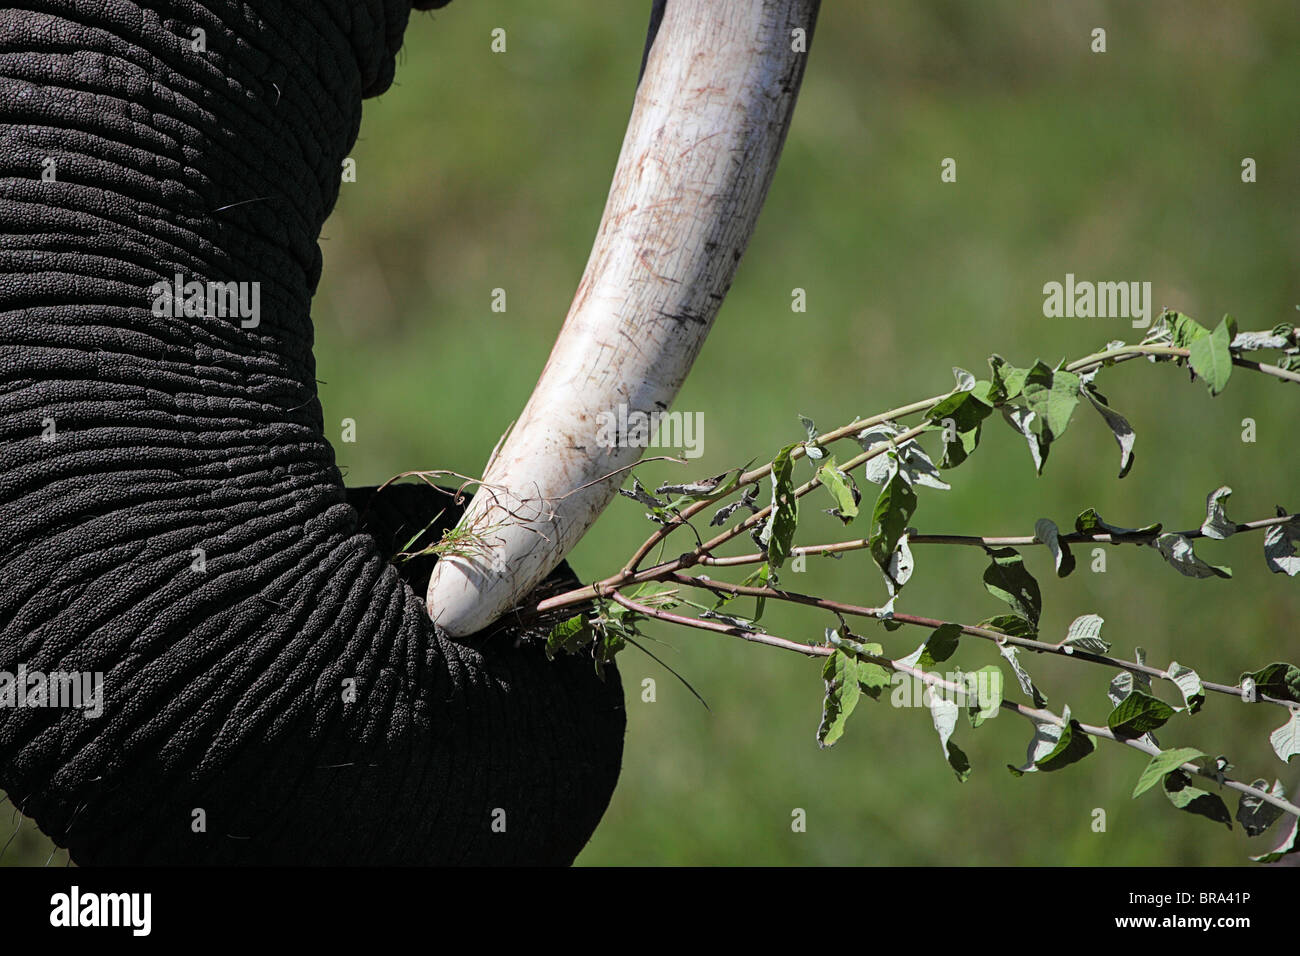 African elephant tusk and detail of trunk clutching branches Stock Photo